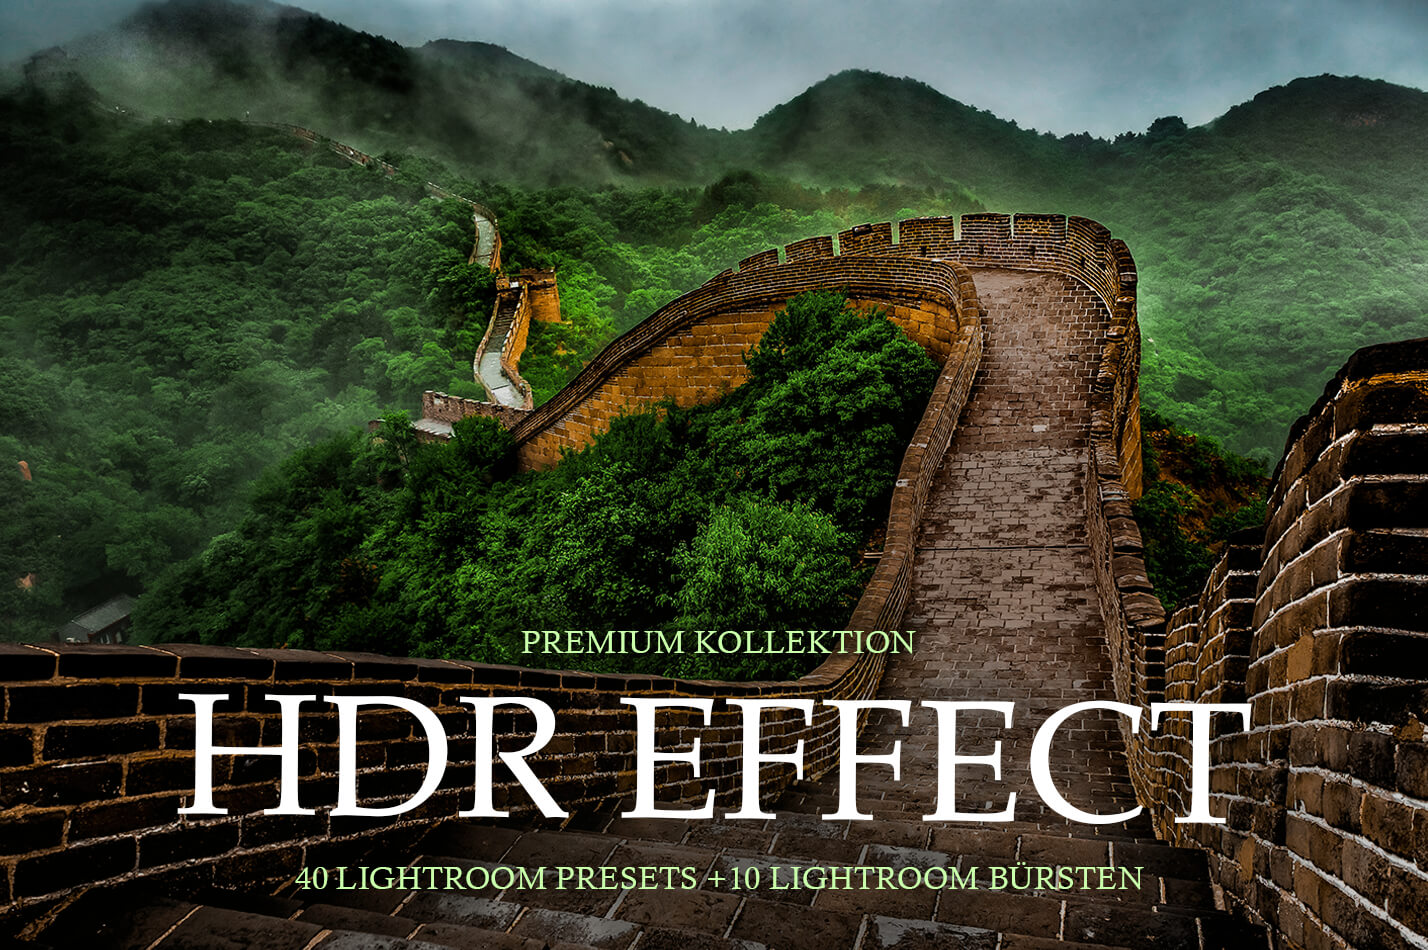 Machinery HDR Effects 3.1.4 download the last version for iphone